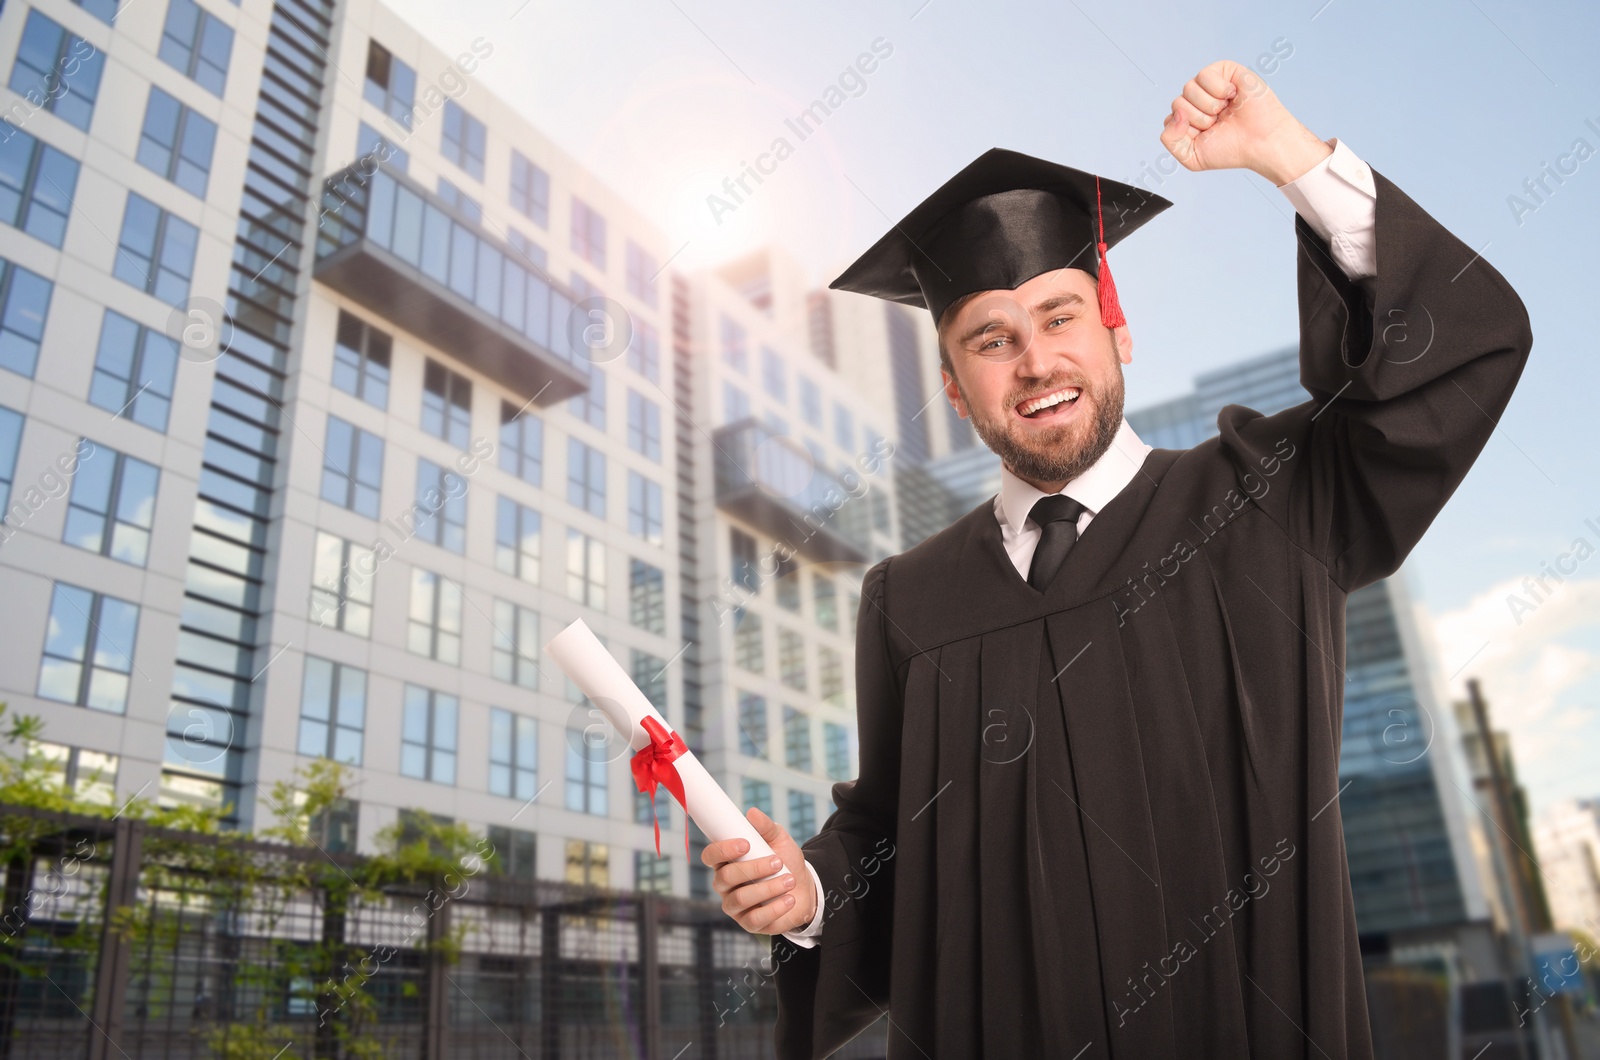 Image of Happy student with graduation hat and diploma outdoors